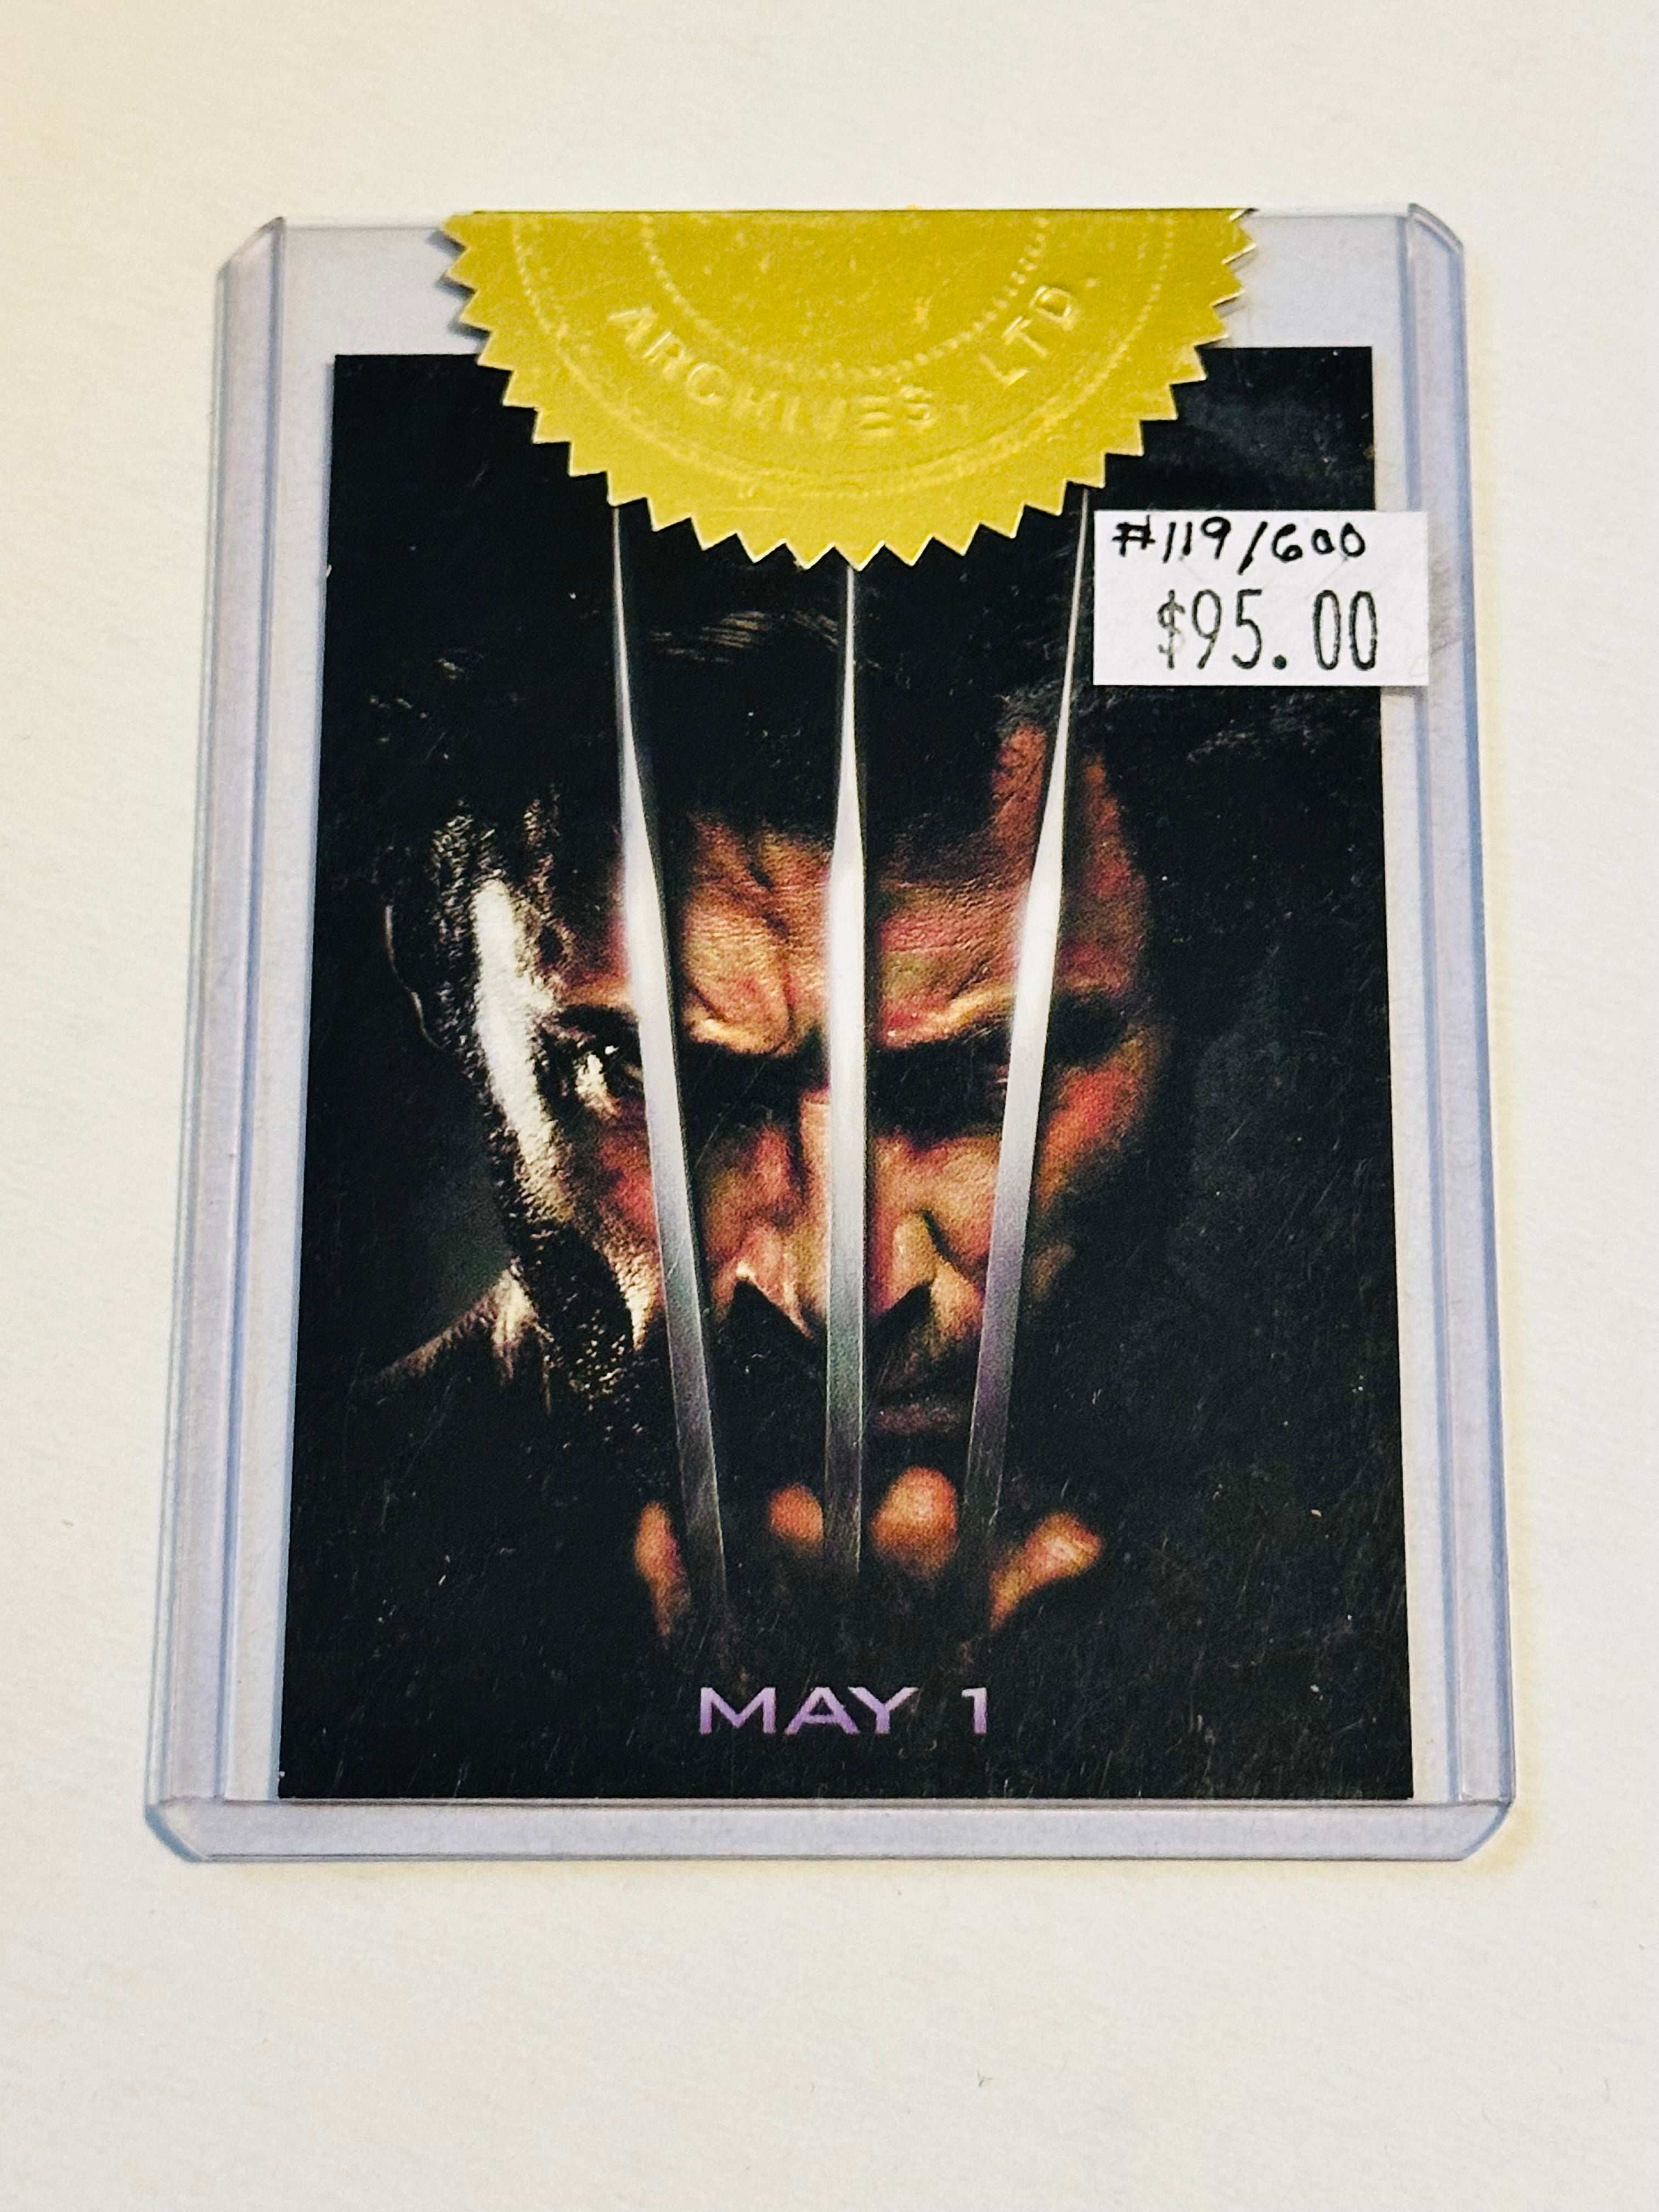 X-Men wolverine movie poster, rare numbered insert card with seal 2009